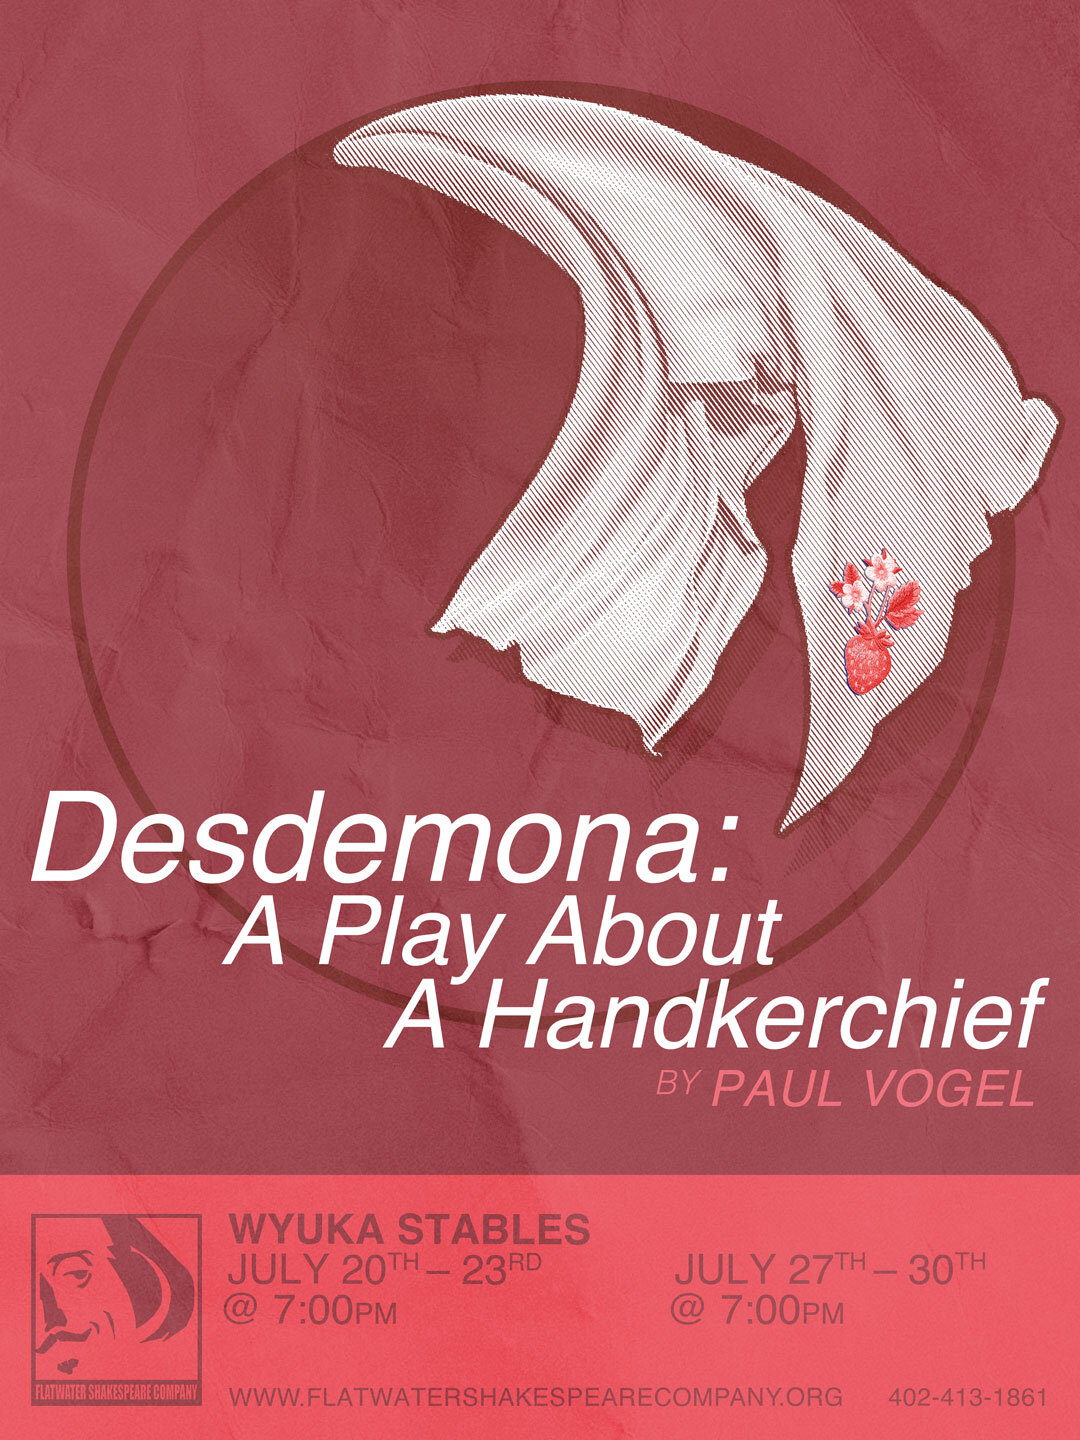 7/29 ADU - ADULT: Sat. July 29, 2023 | 7:00 p.m. - 10:00 p.m. CST | Wyuka Stables (Desdemona: A Play about a Handkerchief)